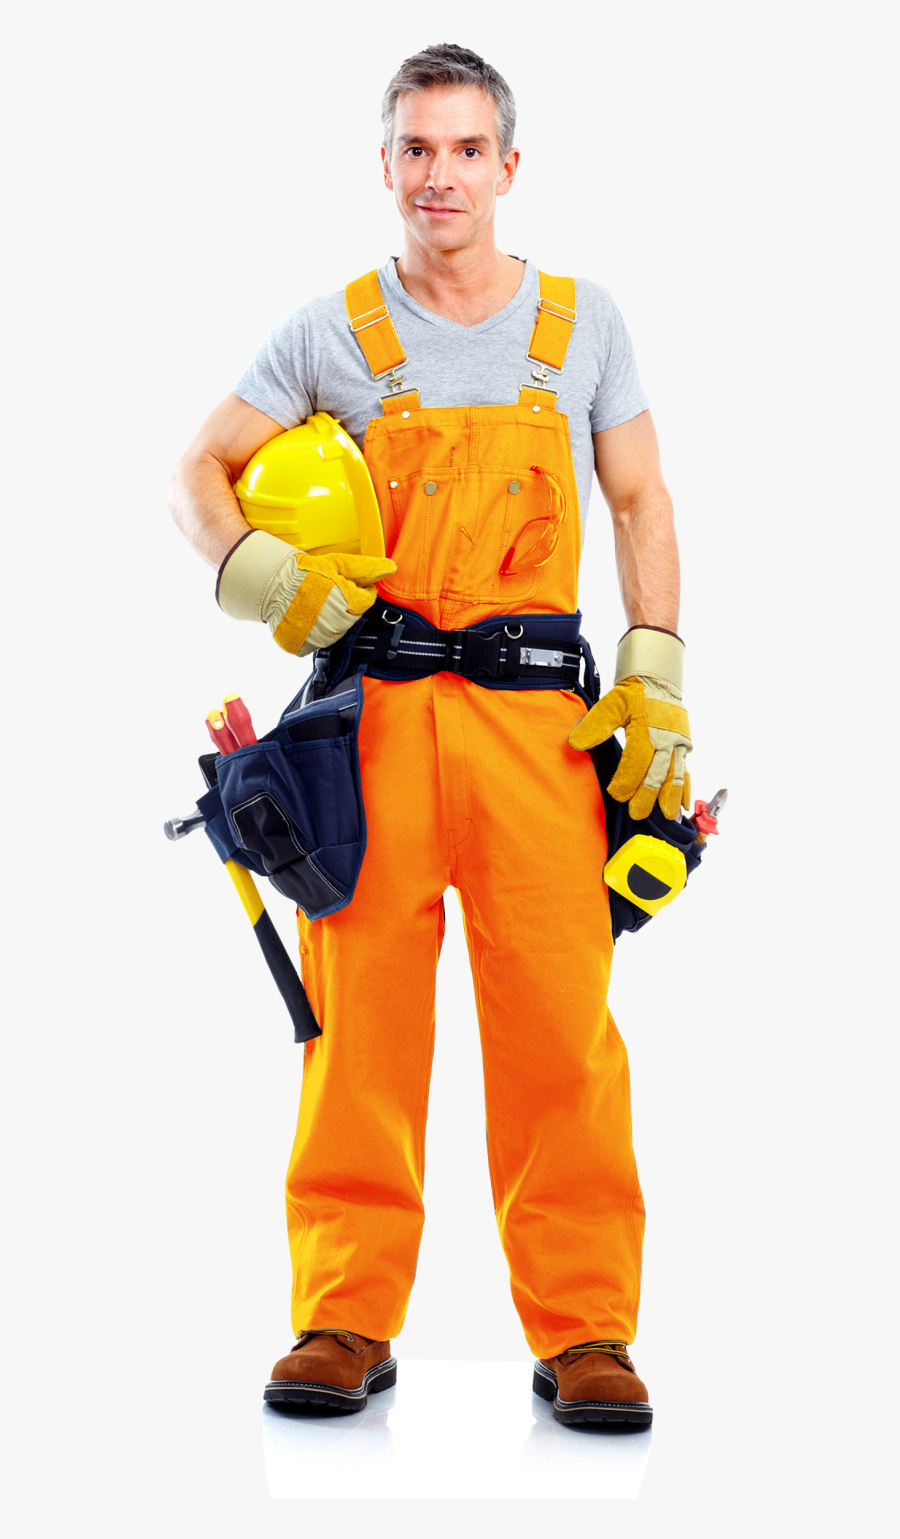 Builder Png Image - Electrical Engineer Png, Transparent Clipart